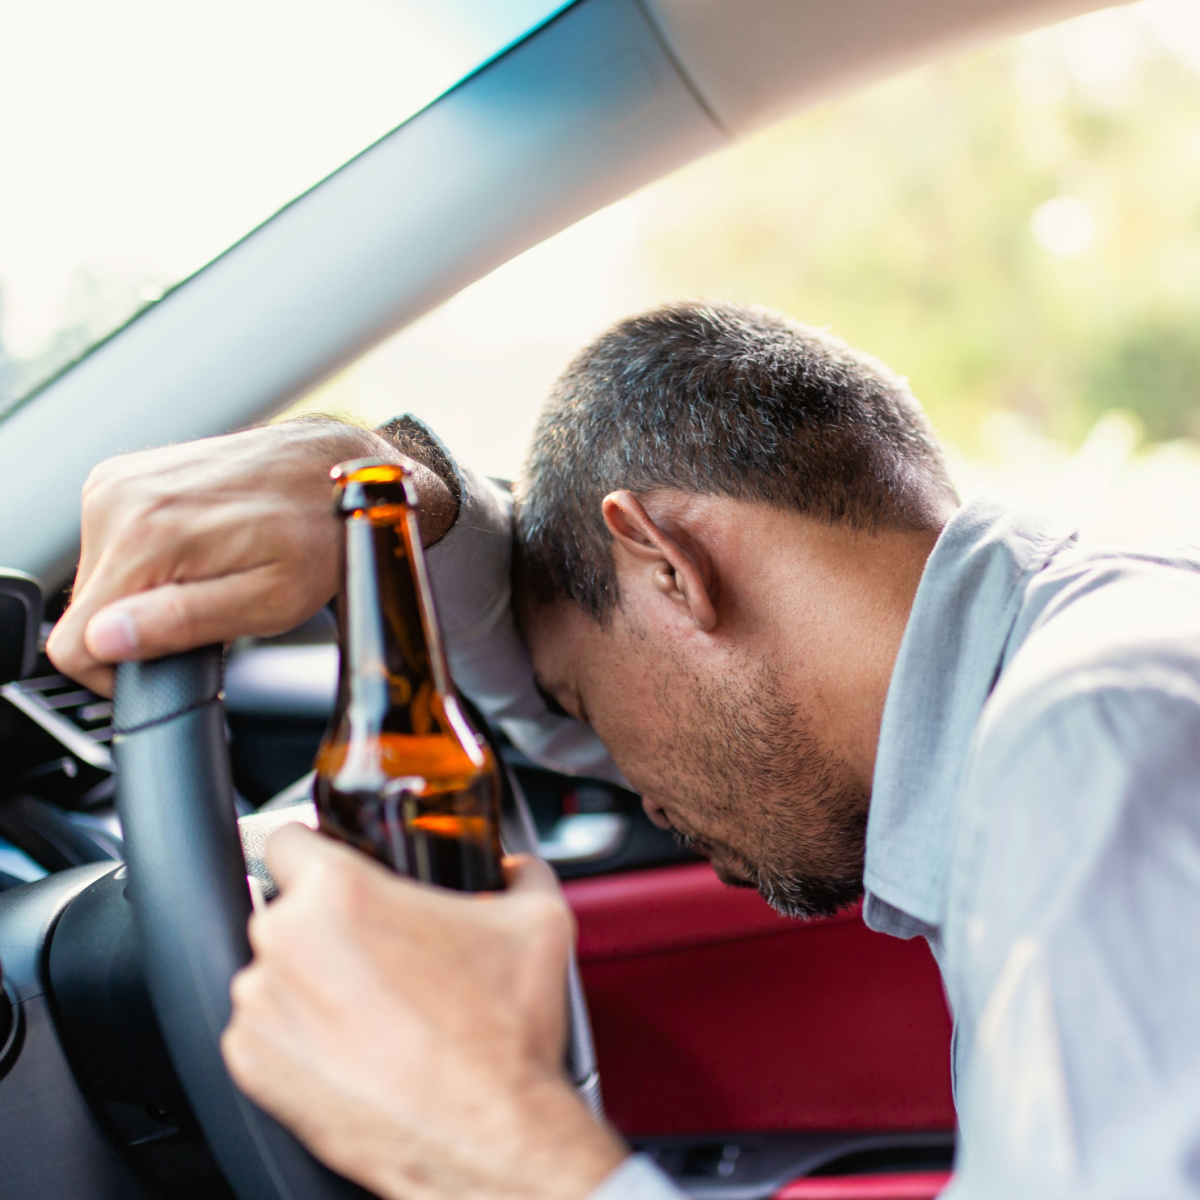 A drunk driver likely to get involved in an accident.